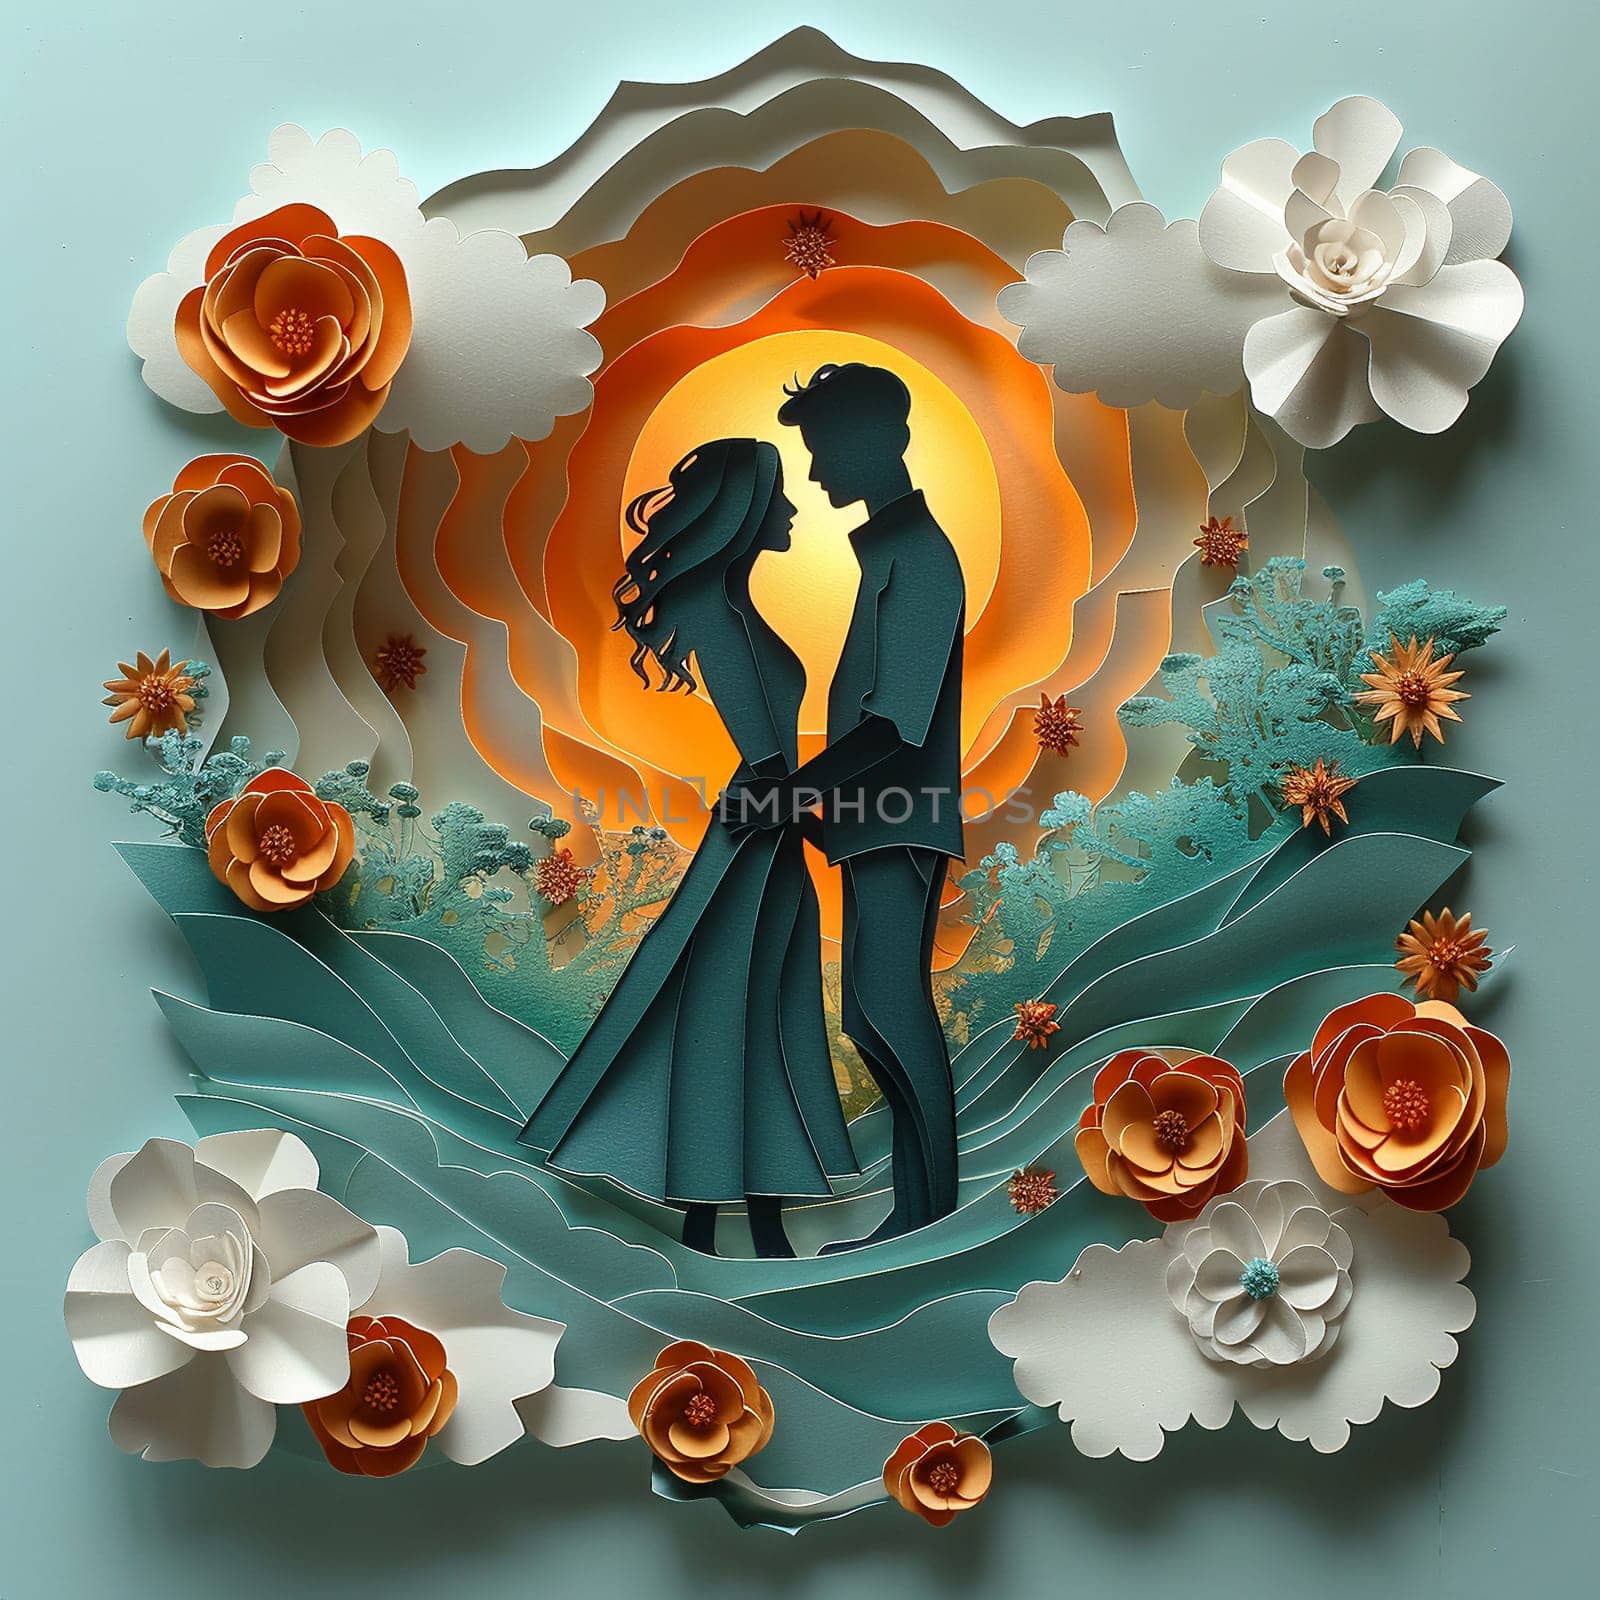 Romantic couples silhouette in a paper cut-out style set against a whimsical by Benzoix